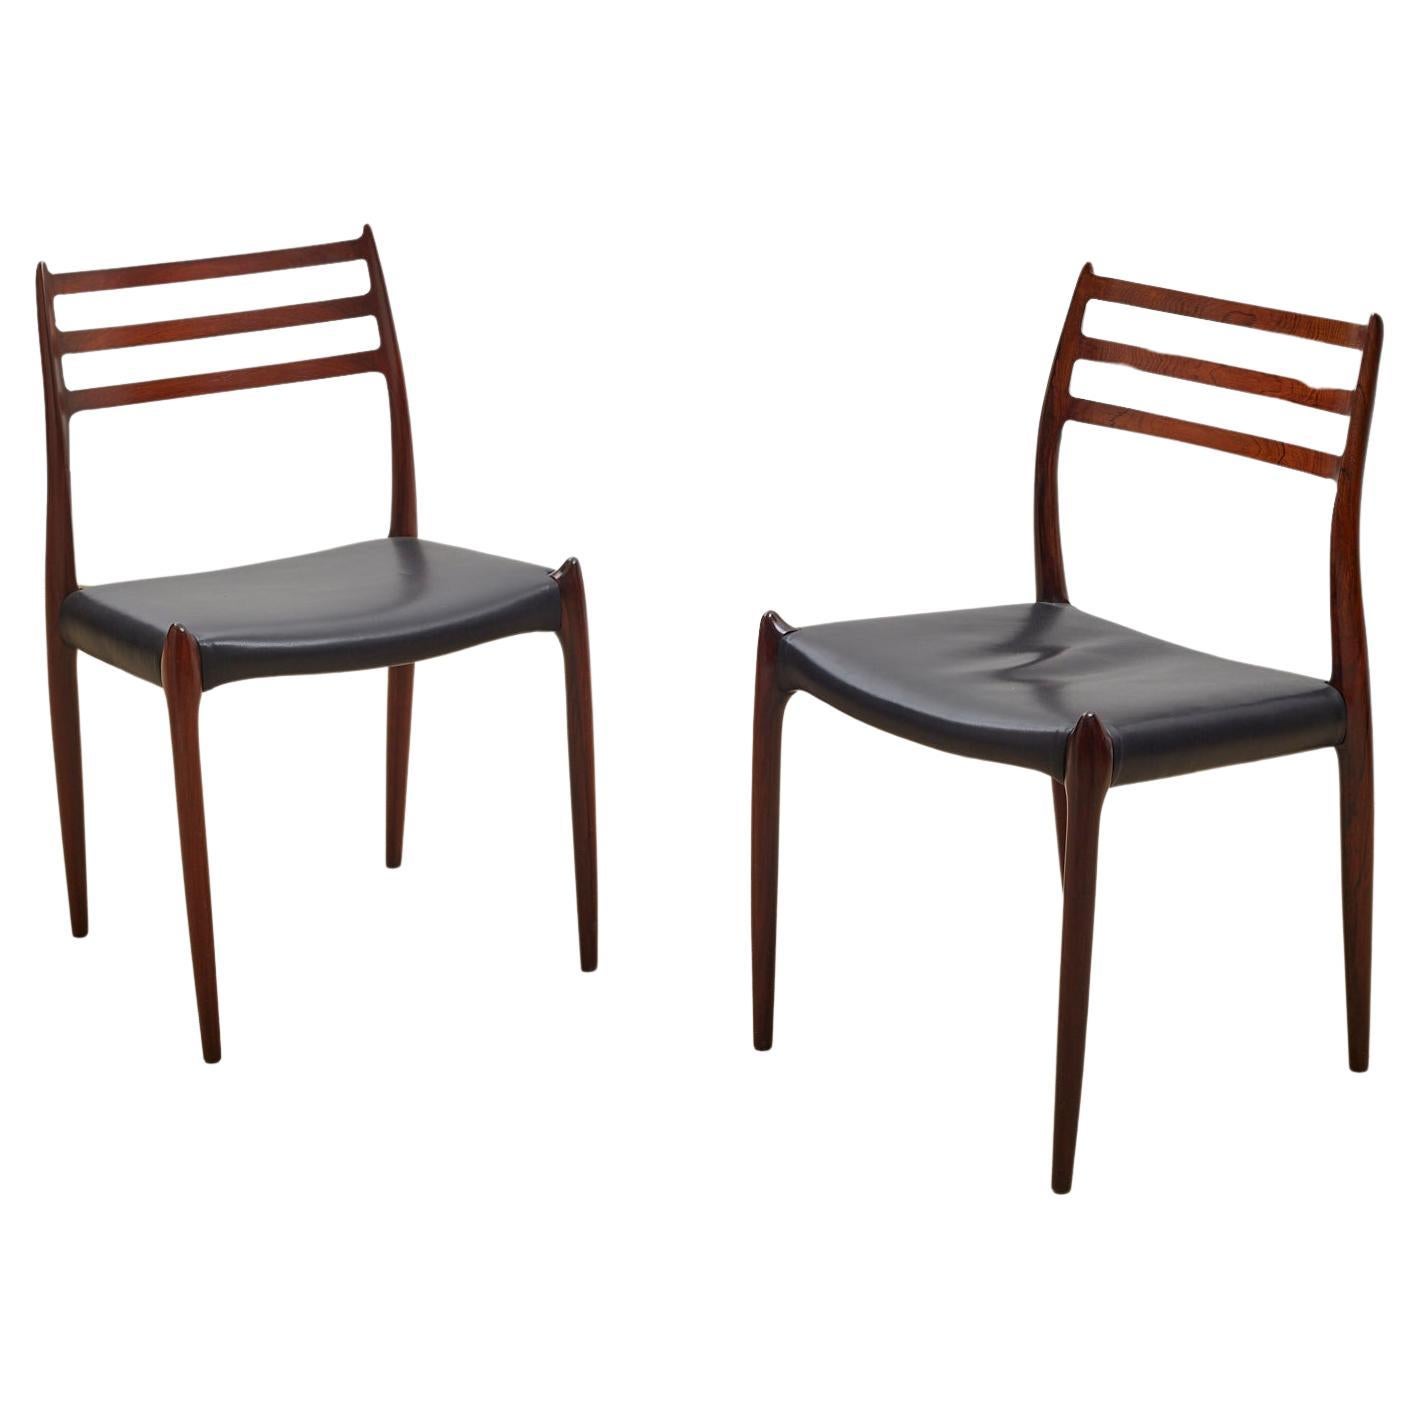 Two Rosewood, Black Leather Niels Otto Møller Chairs, Model 78. c1960